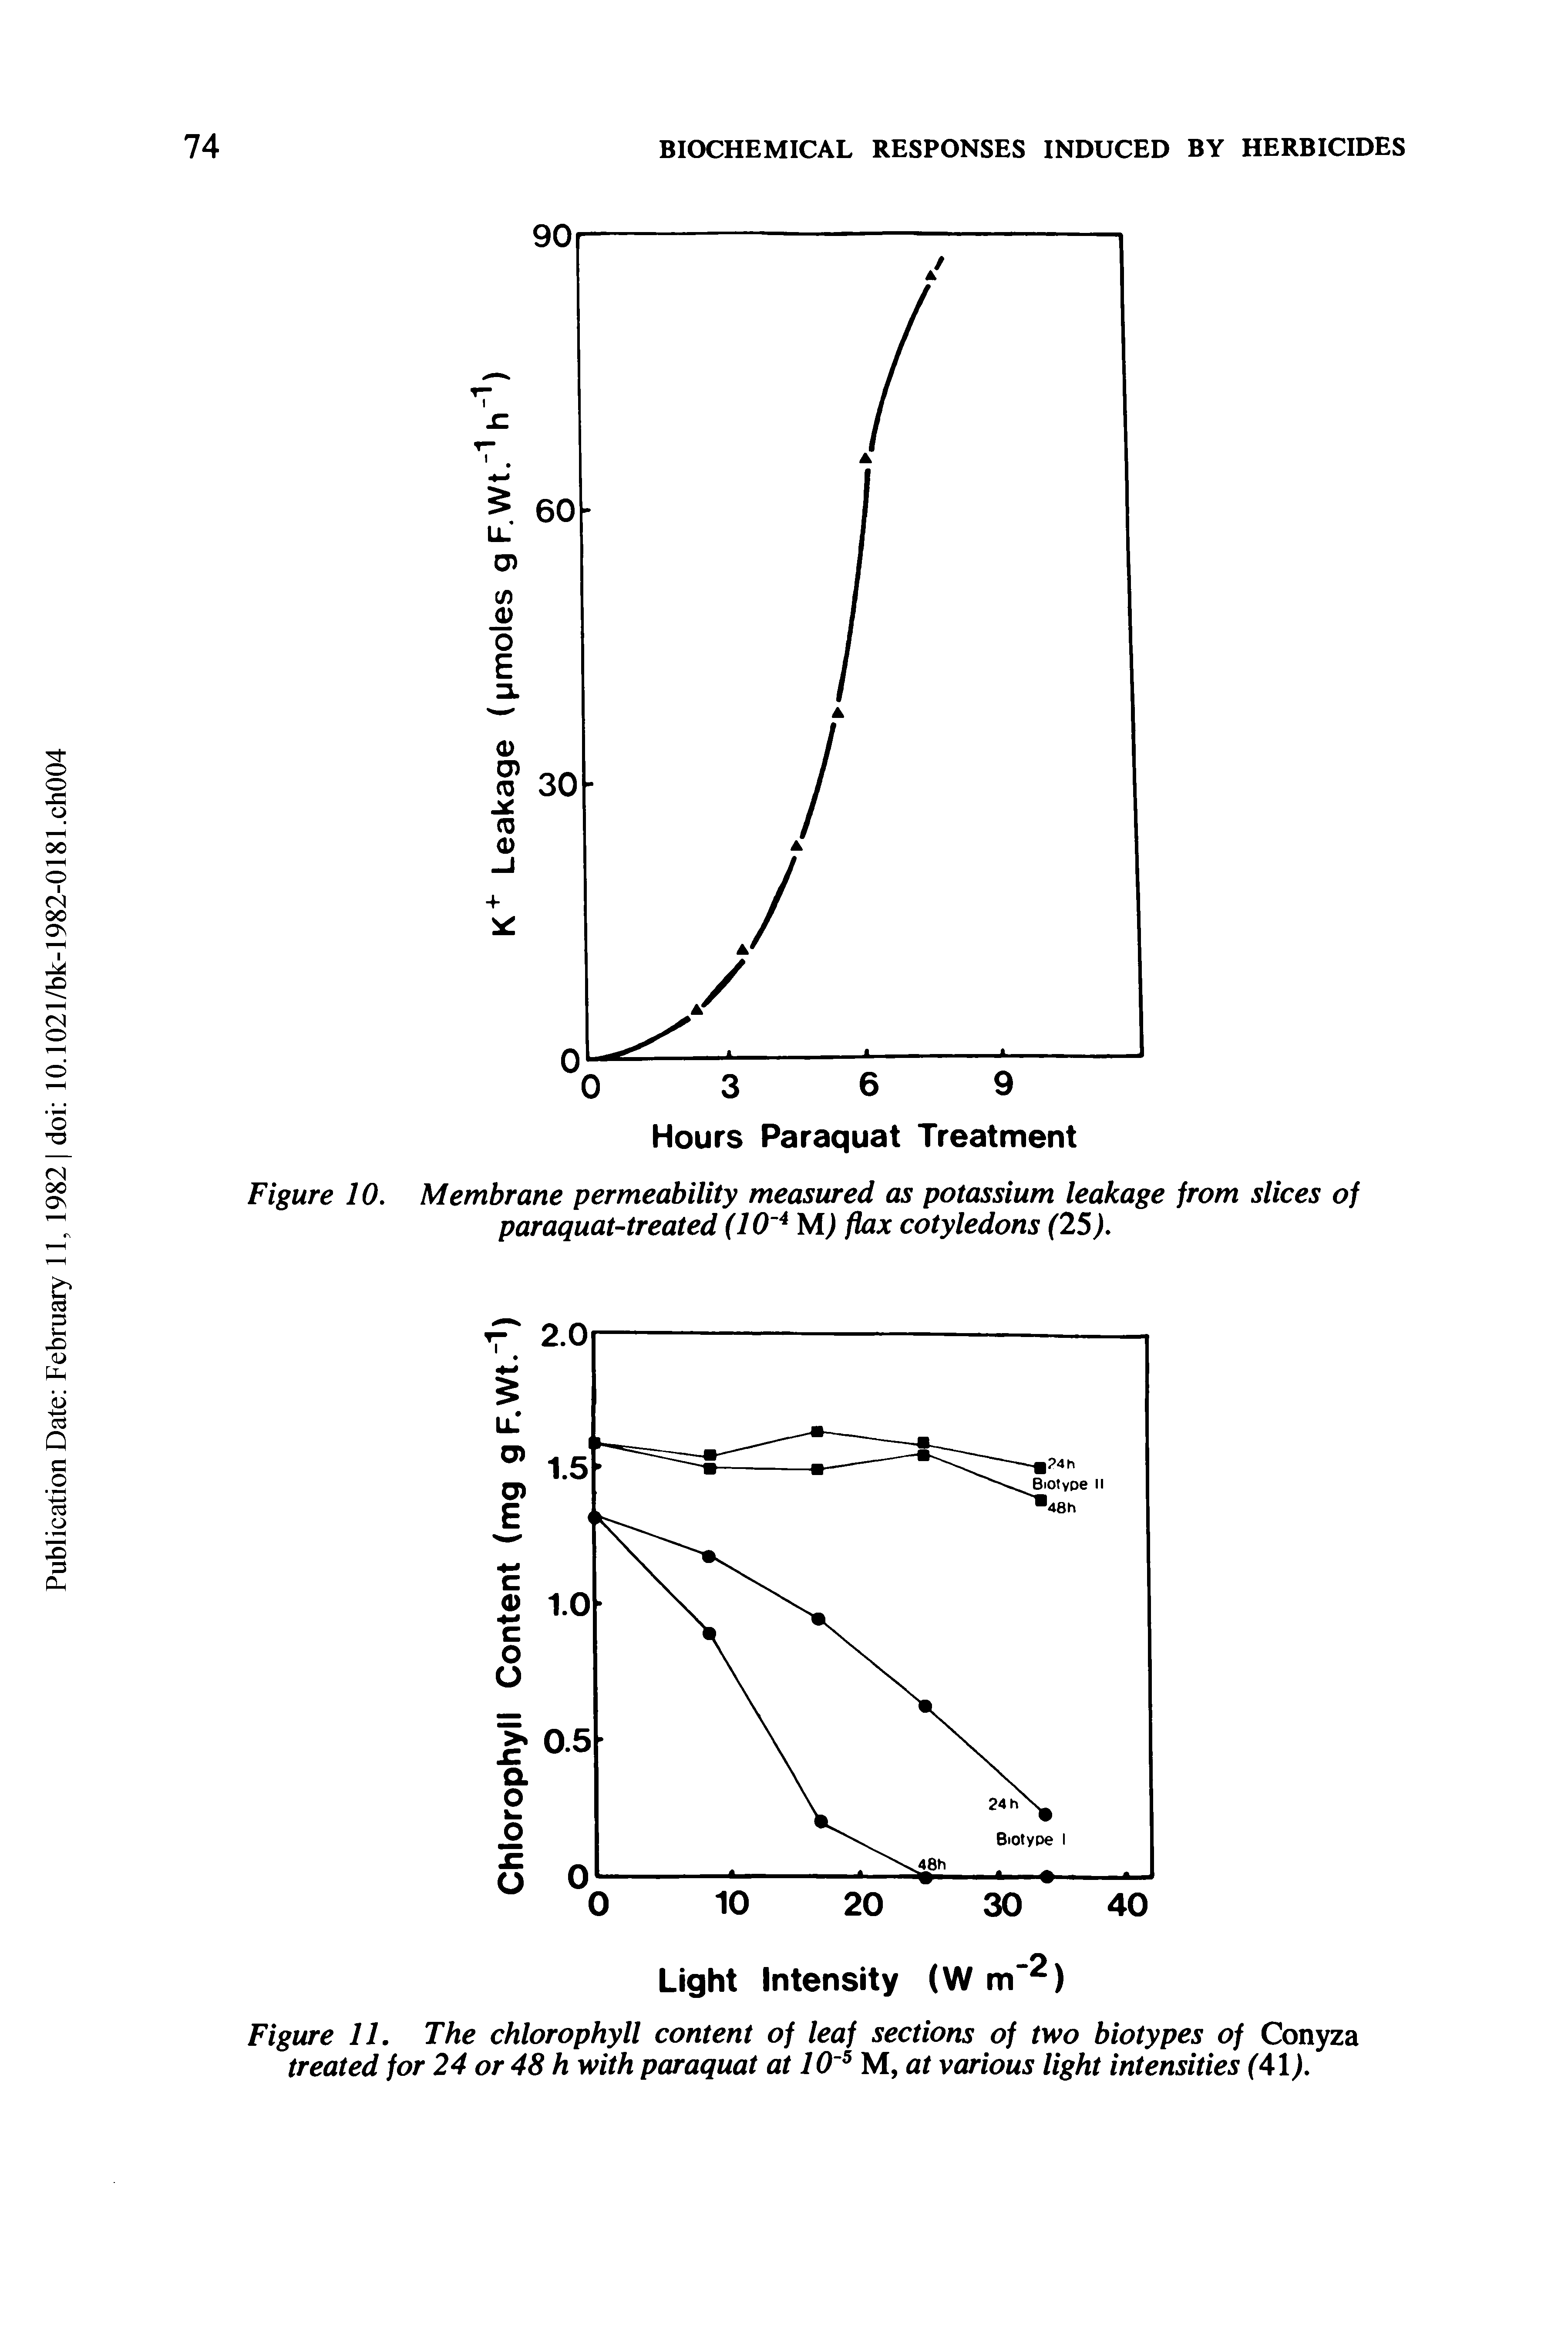 Figure 11. The chlorophyll content of leaf sections of two biotypes of Conyza treated for 24 or 48 h with paraquat at 10 M, at various light intensities (41).